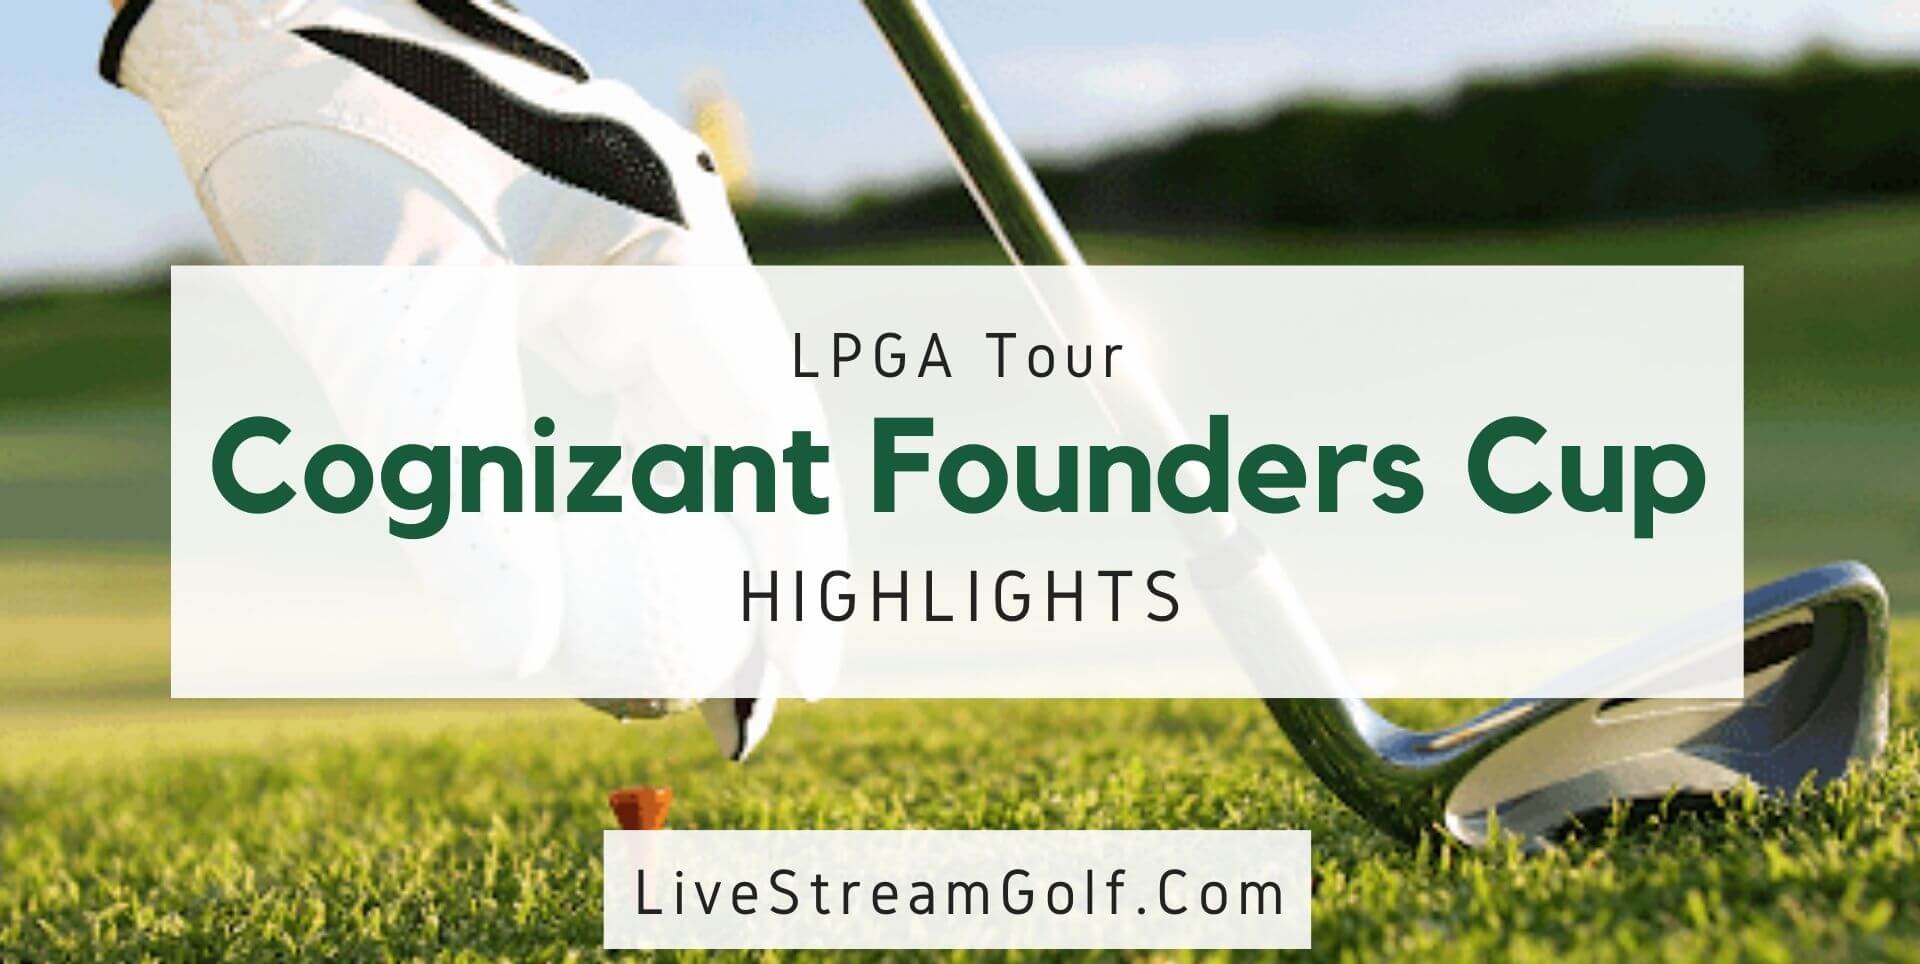 Cognizant Founders Cup Rd 2 Highlights LPGA Tour 2021